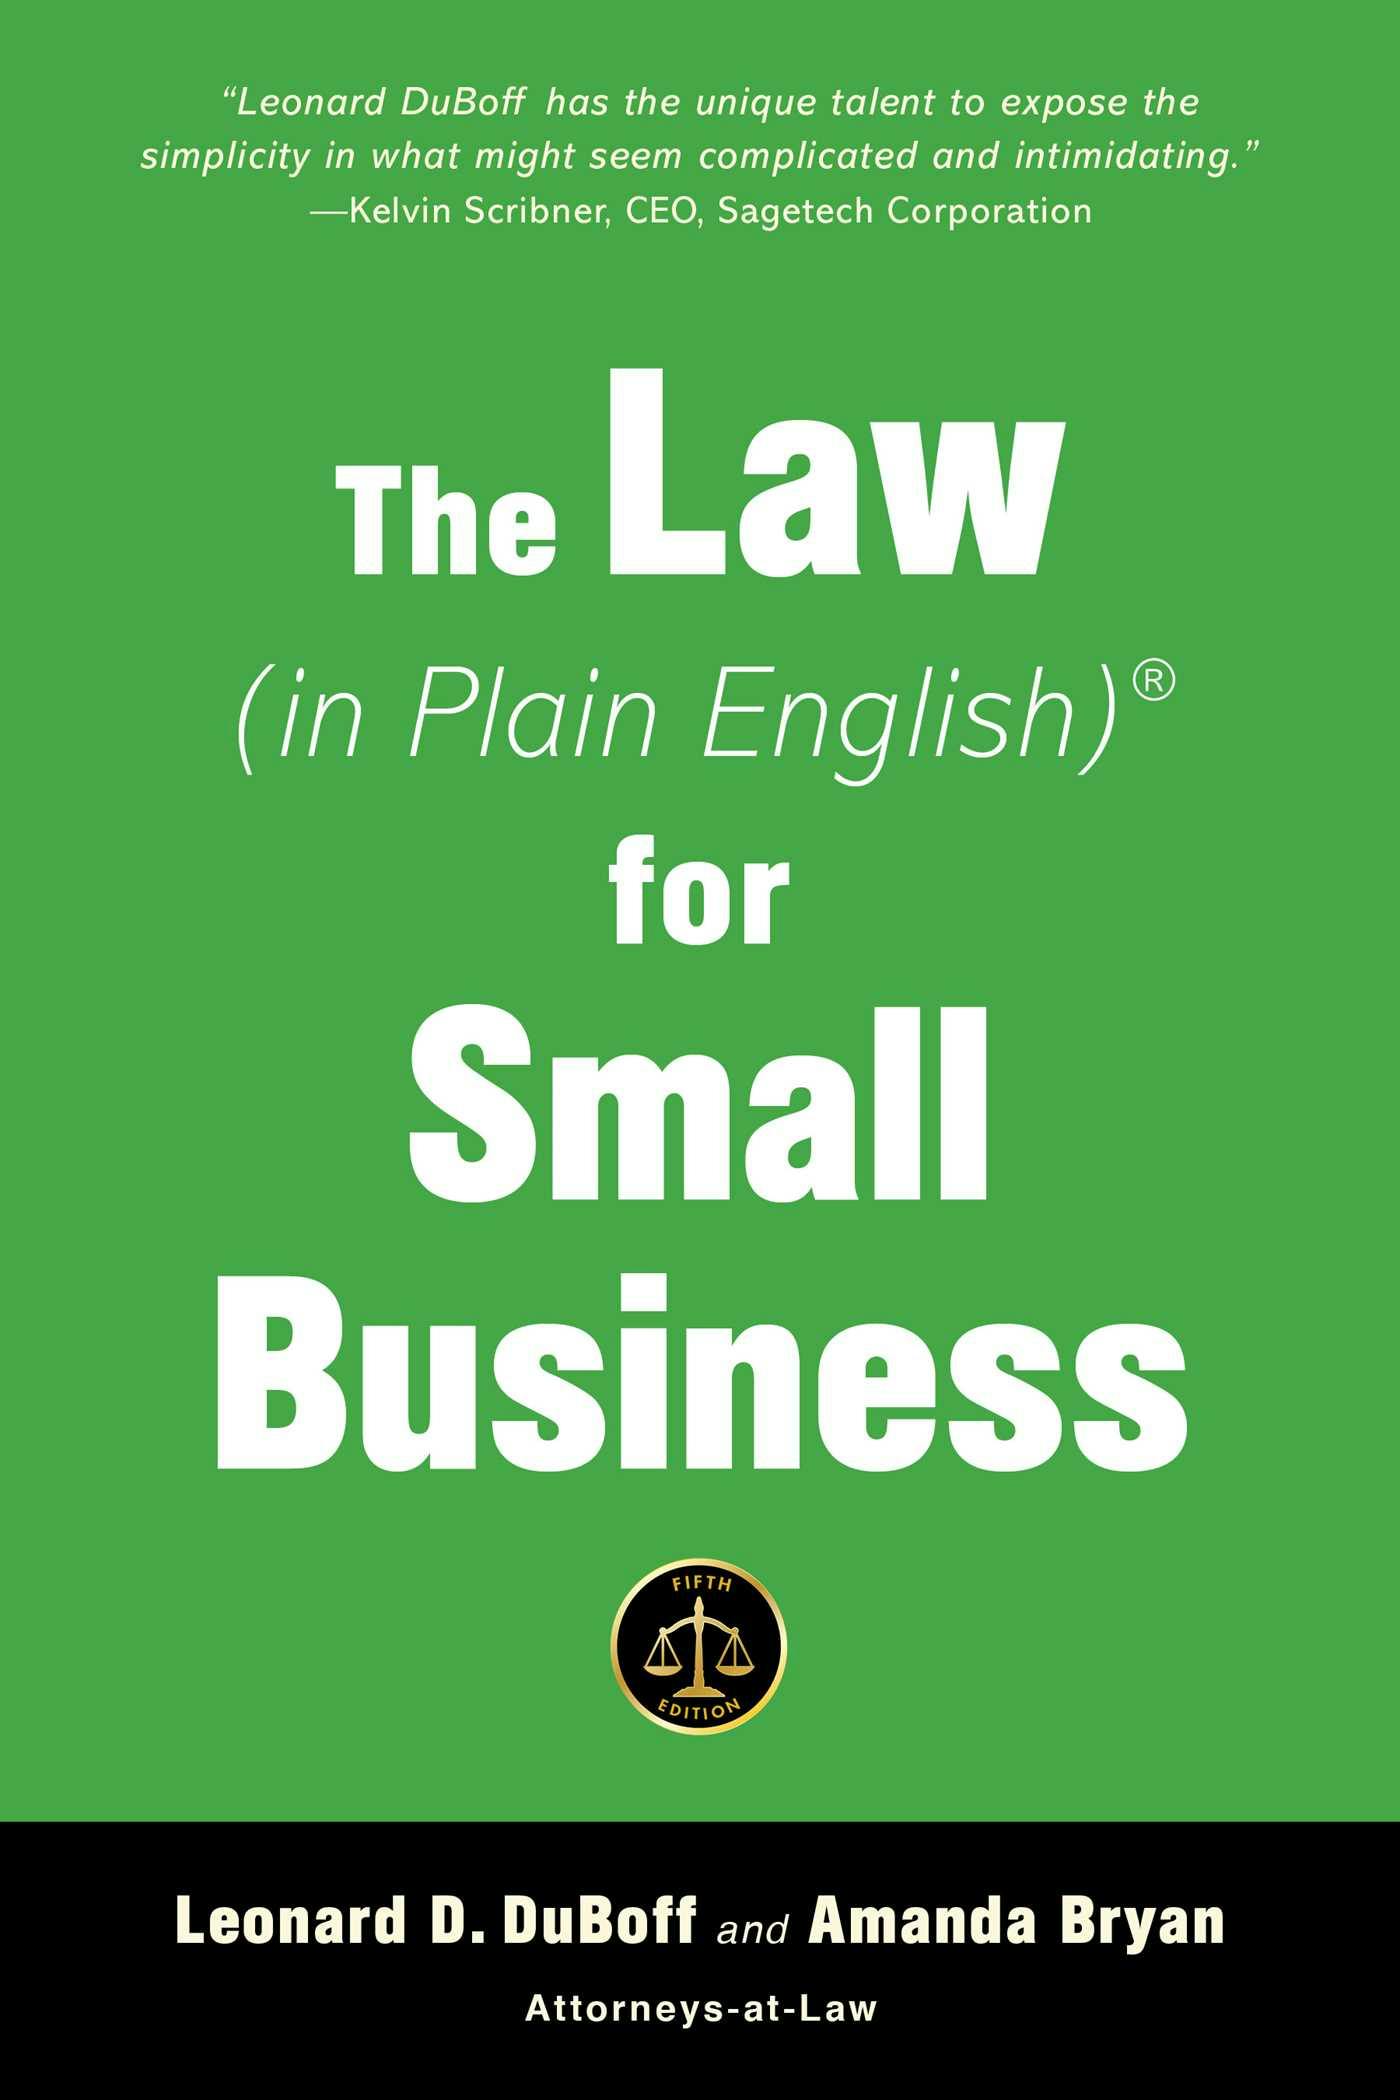 The Law (in Plain English) for Small Business (Fifth Edition) - Amanda Bryan, Leonard D. DuBoff